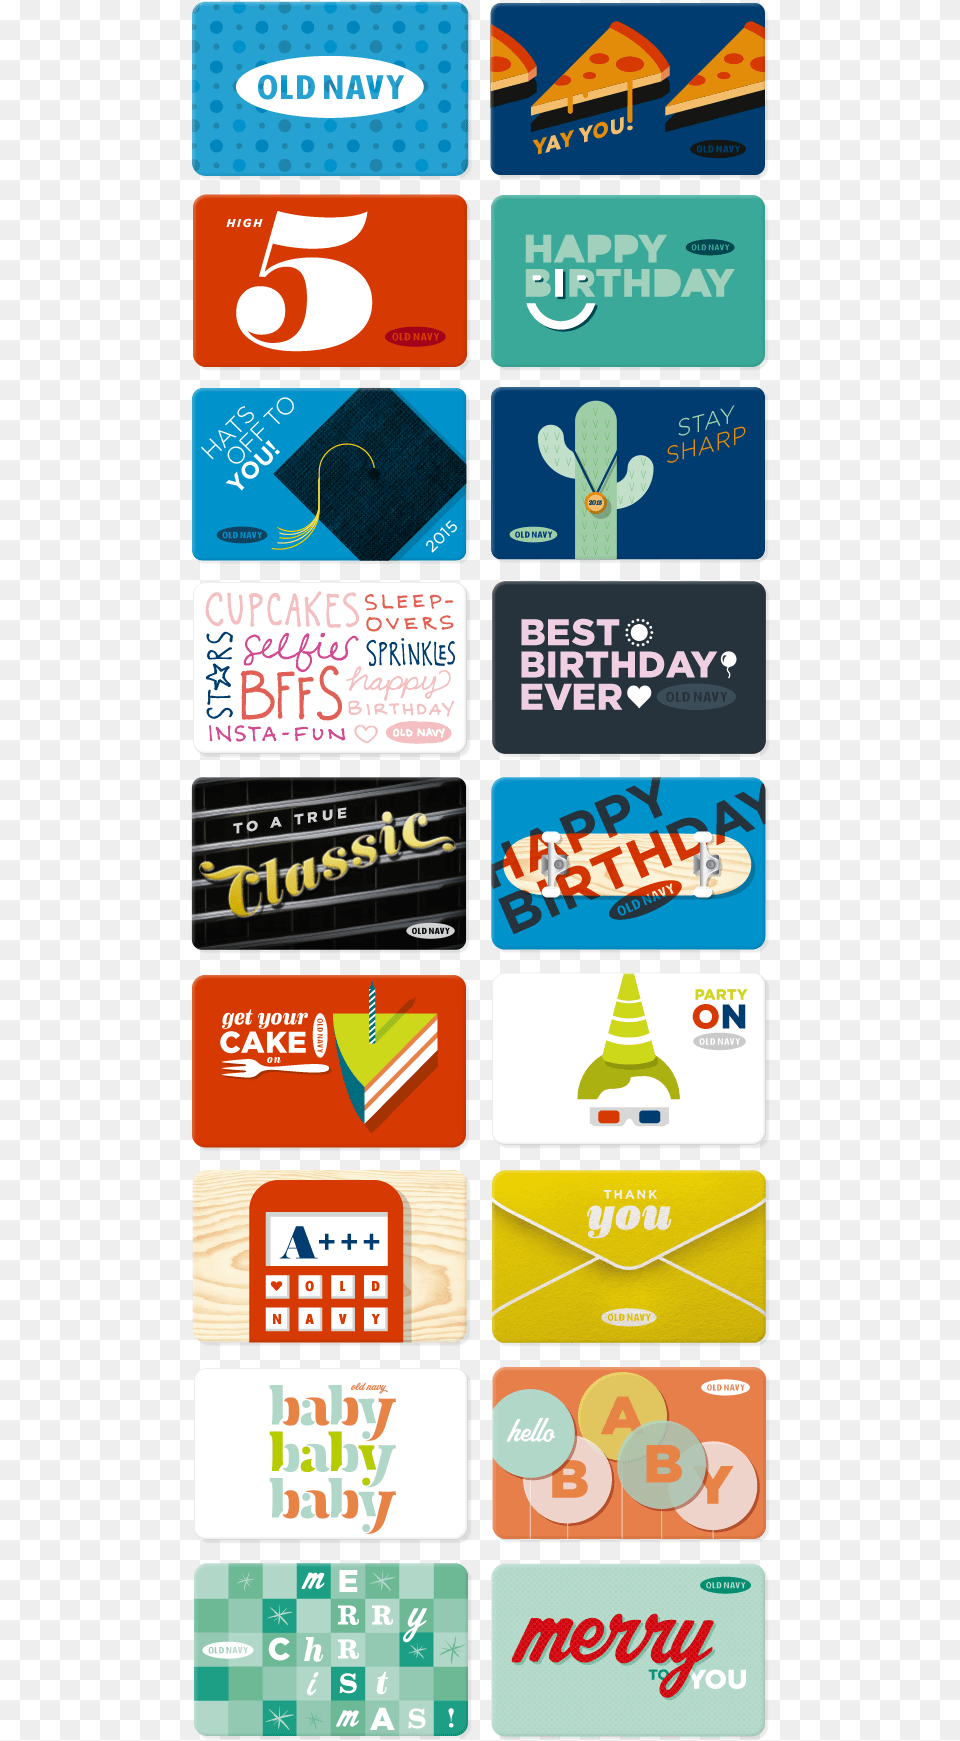 A Year39s Worth Of Old Navy Giftcard Designs That Are Old Navy, Text Free Transparent Png